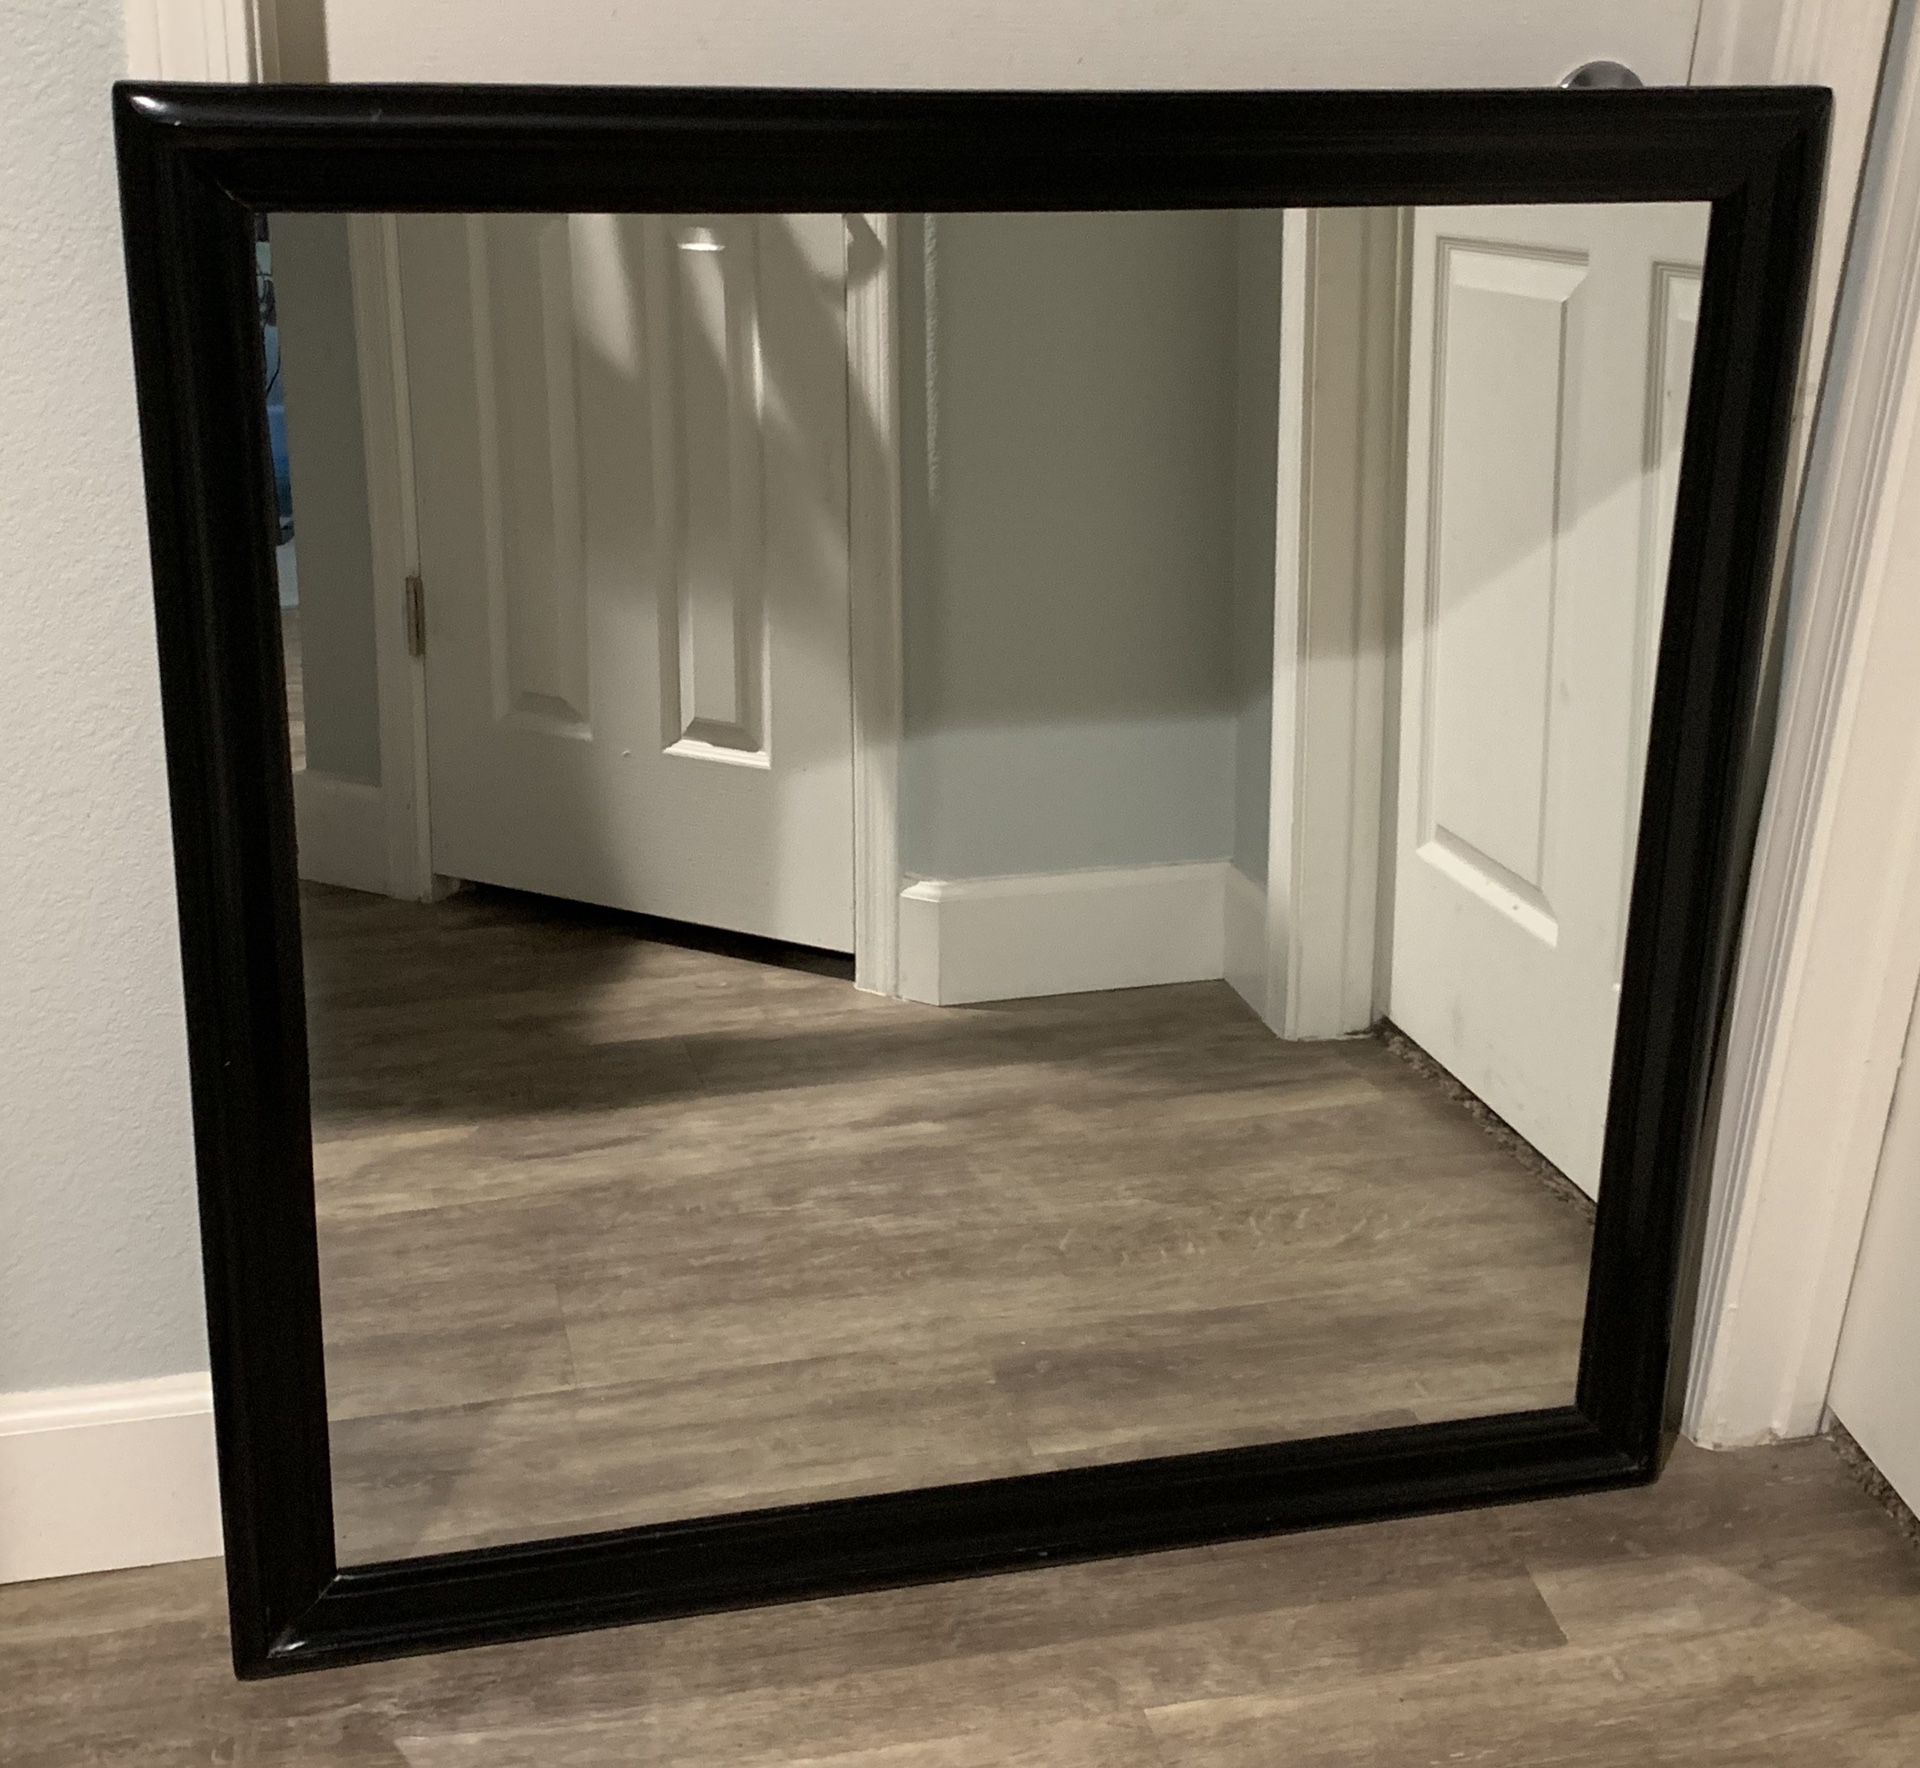 Wall Mirror with Wood Finish $25 OBO